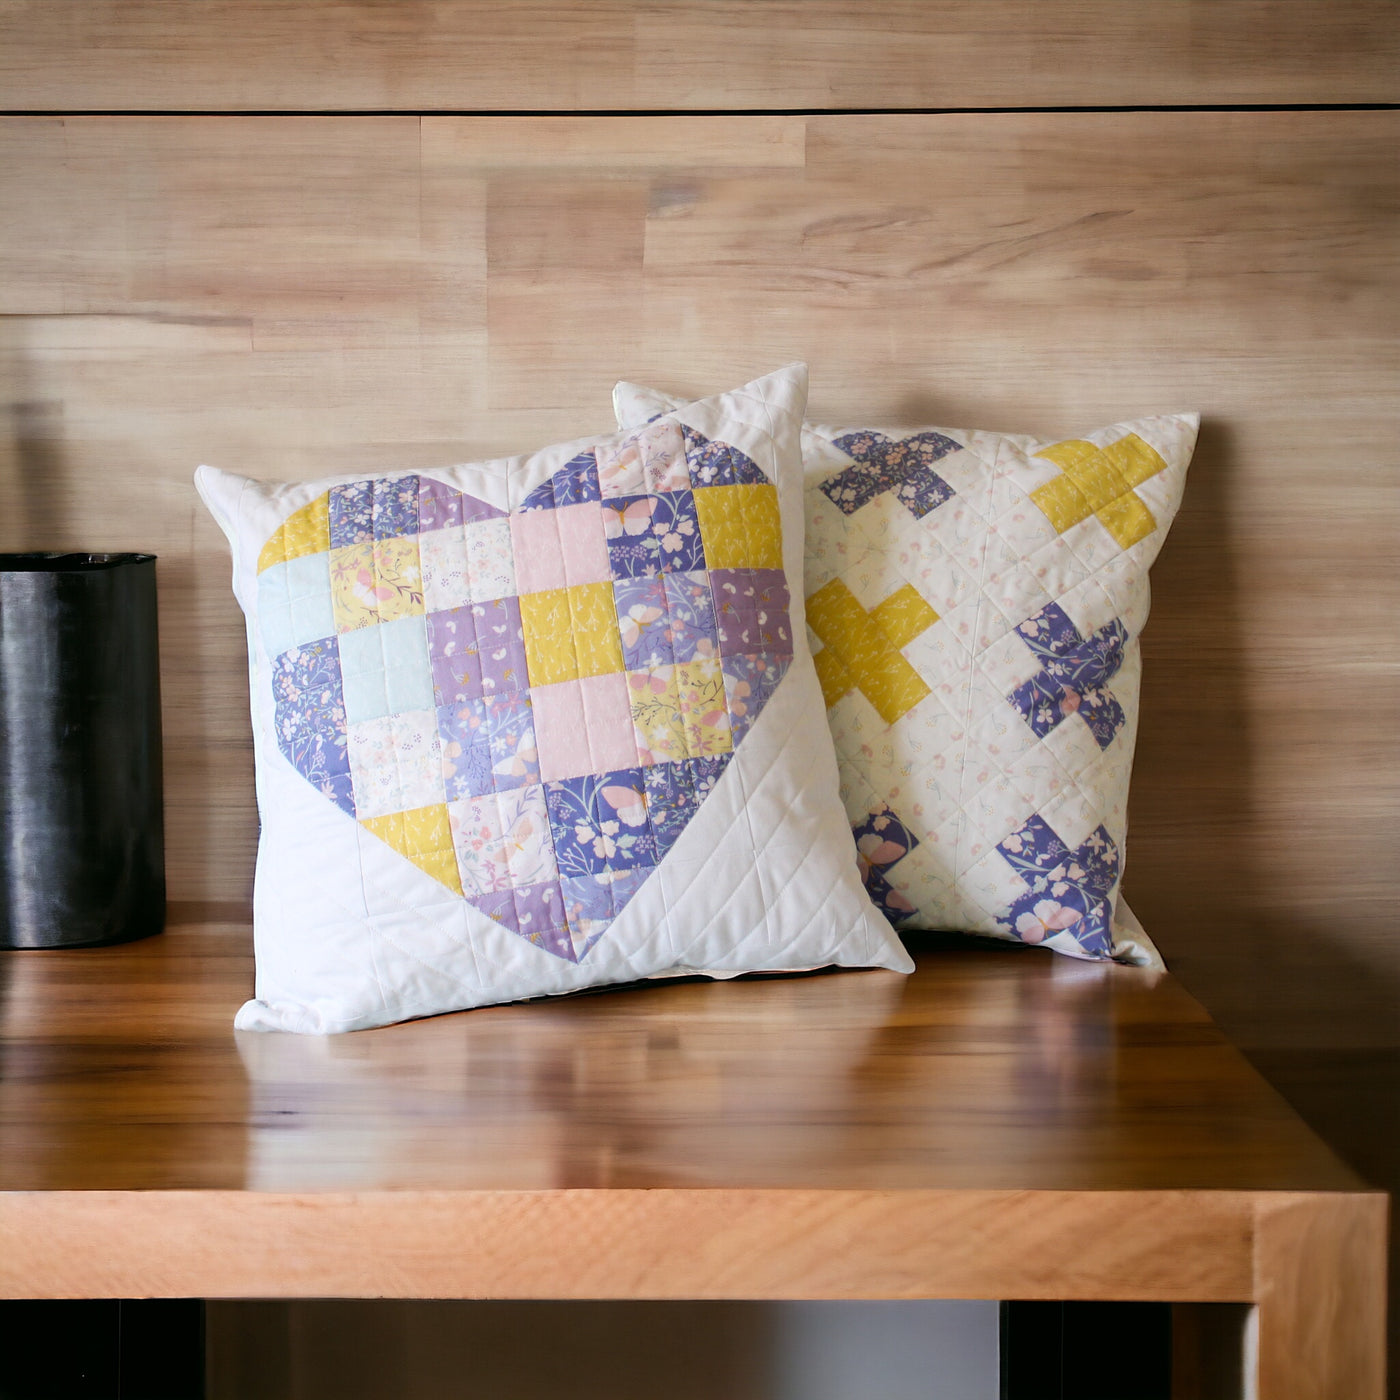 Prints Charming Cushion – PDF Download Instructions Booklet